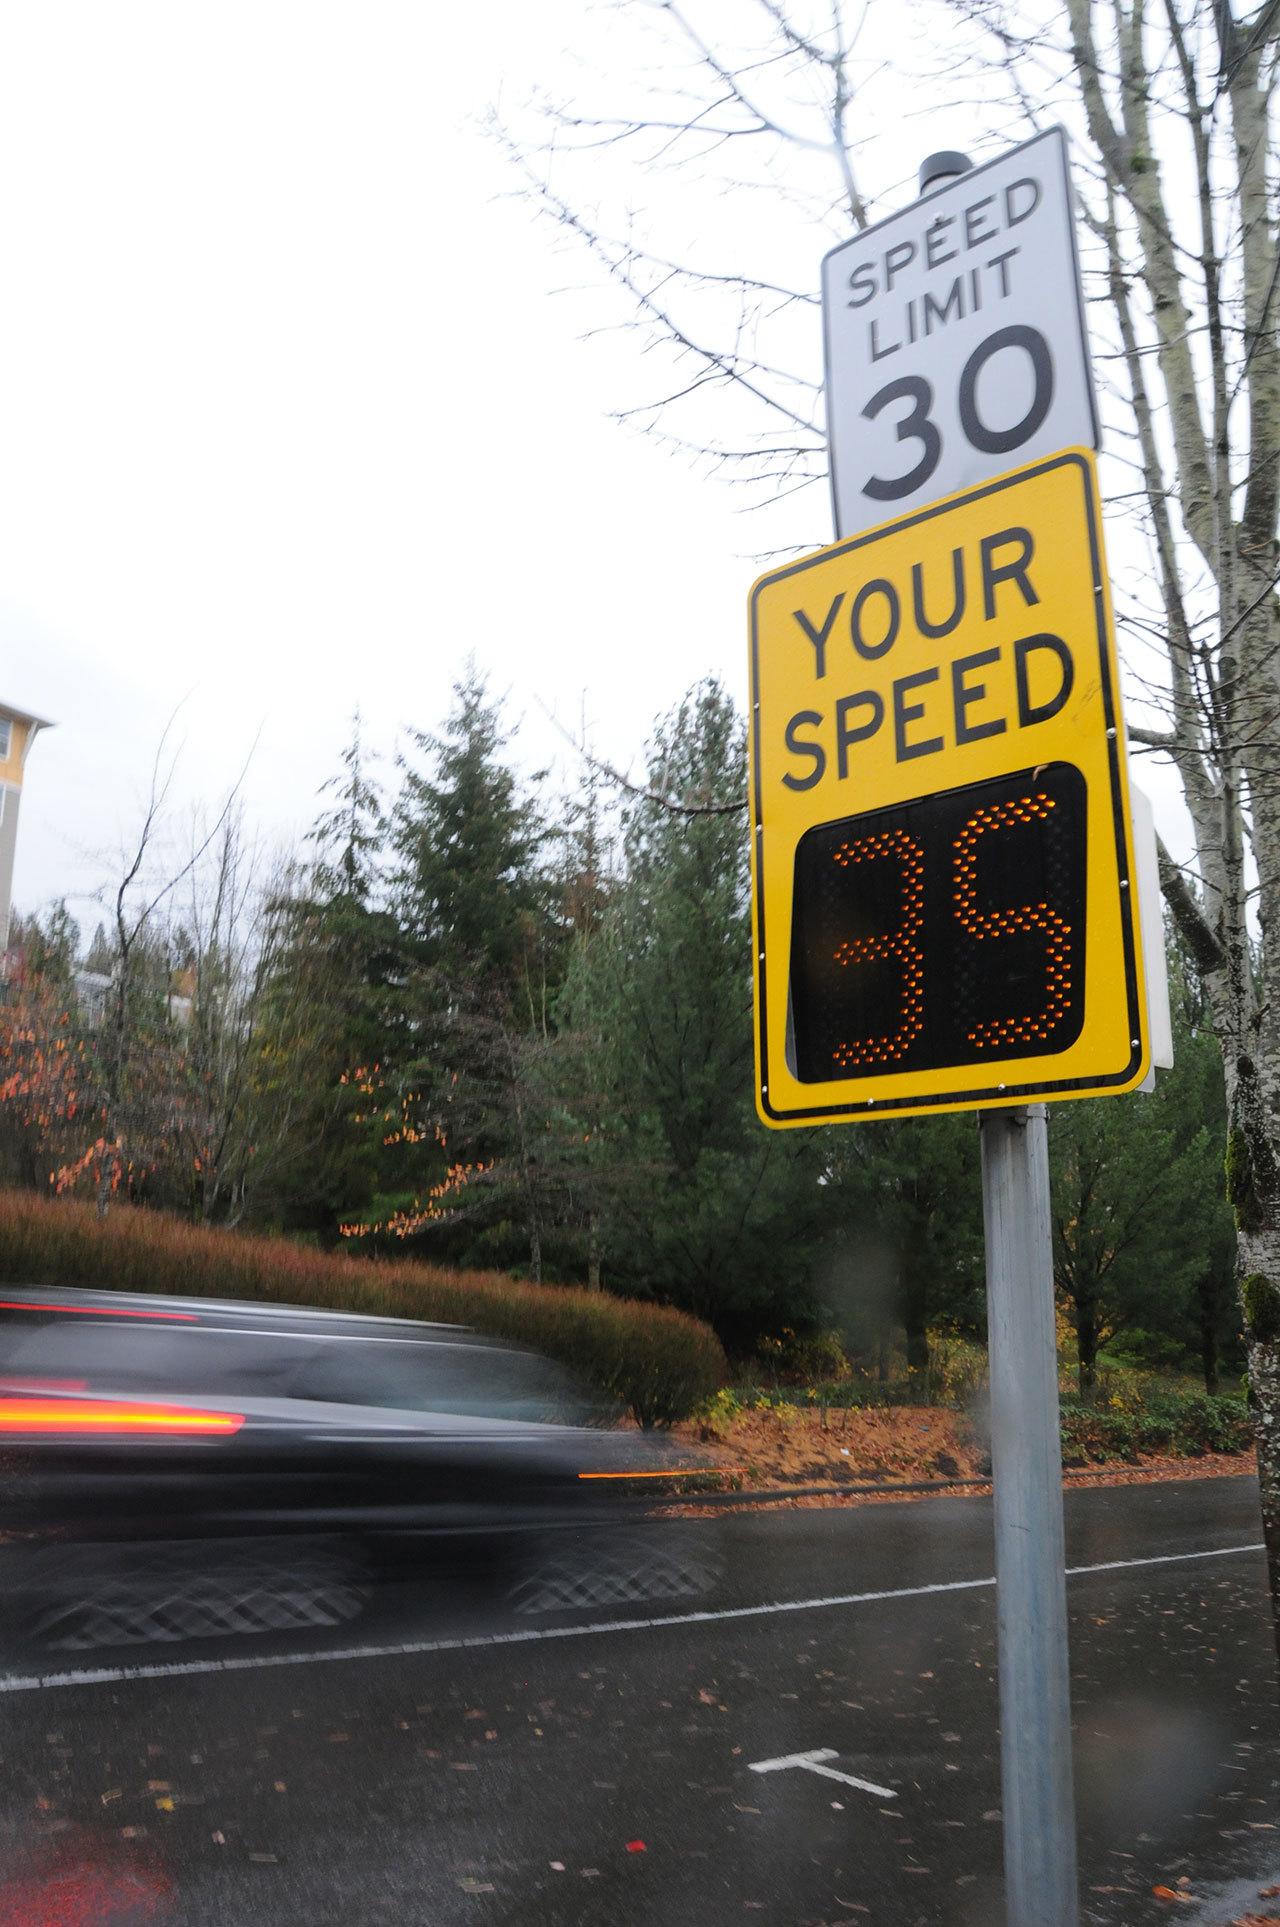 Speeding a growing concern in the Issaquah Highlands